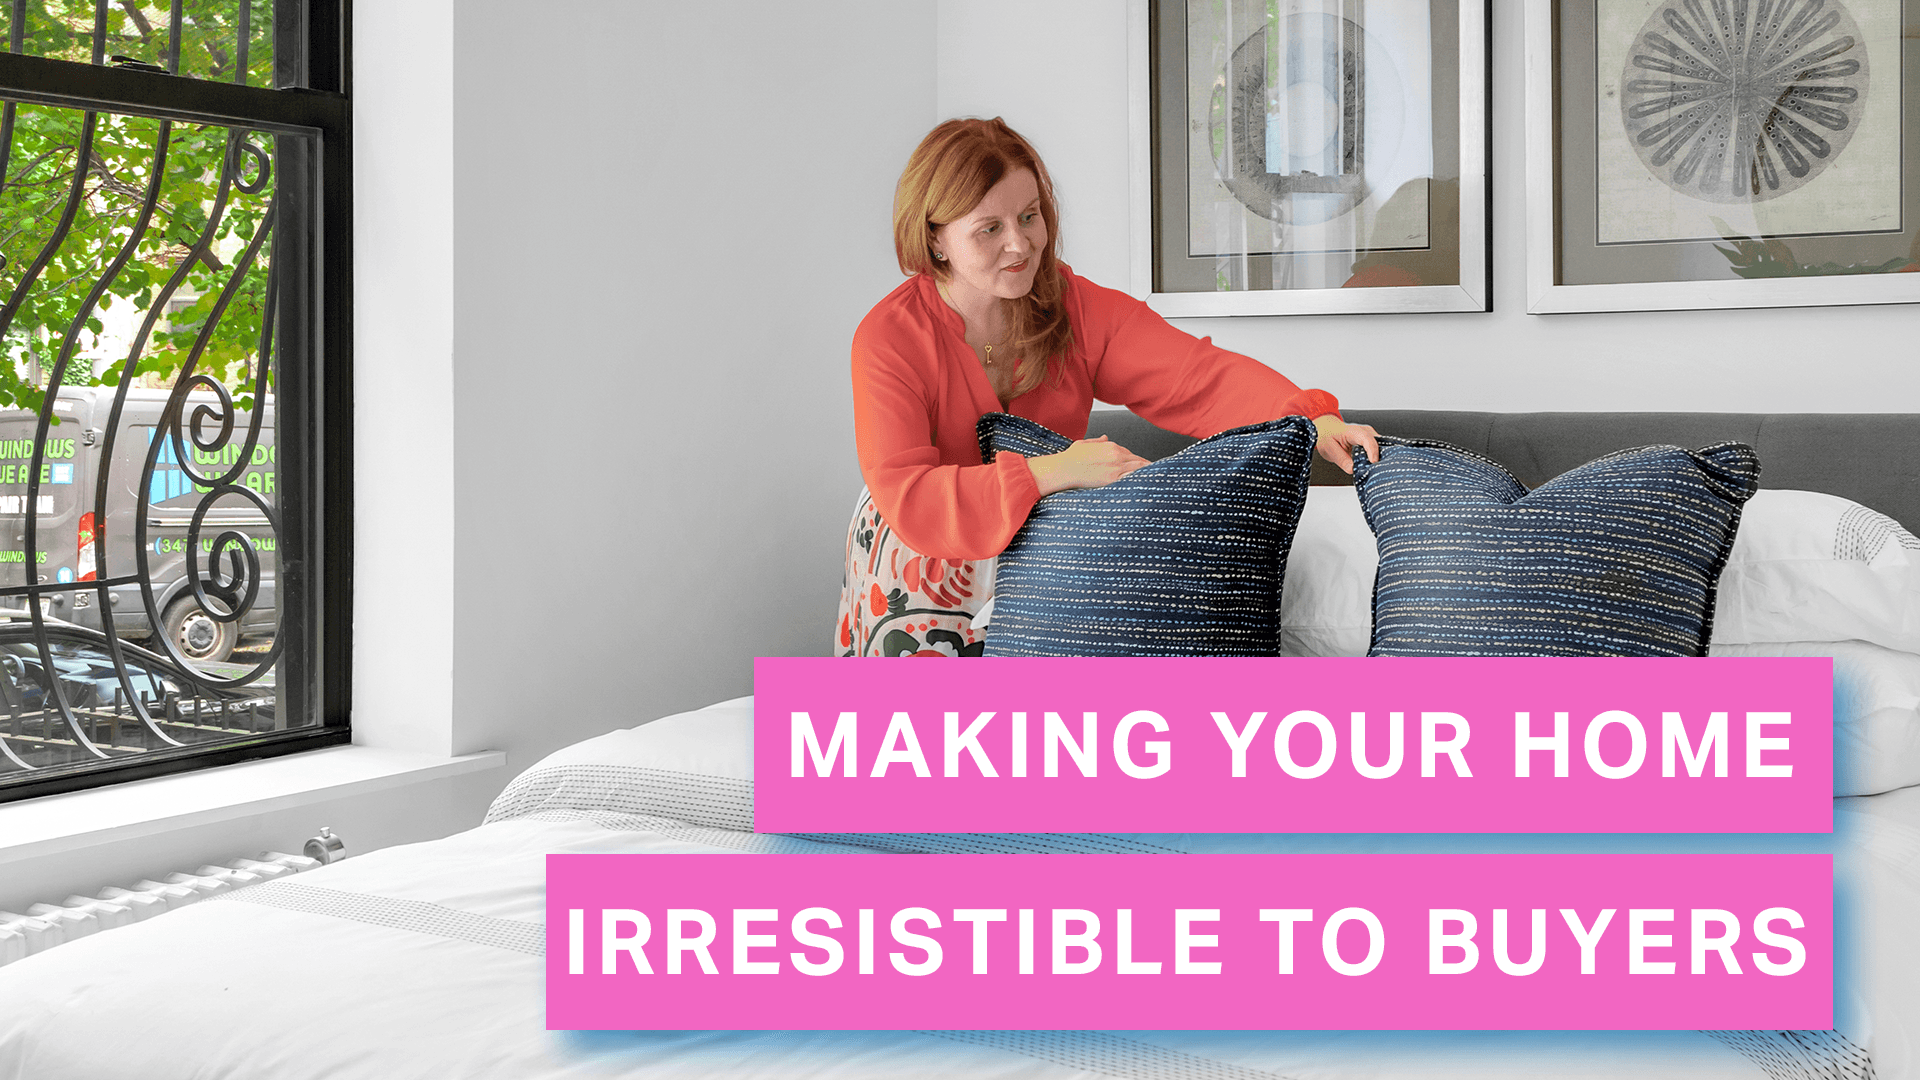 A Change of A Dress - Making Your Home Irresistible to Buyers (1)